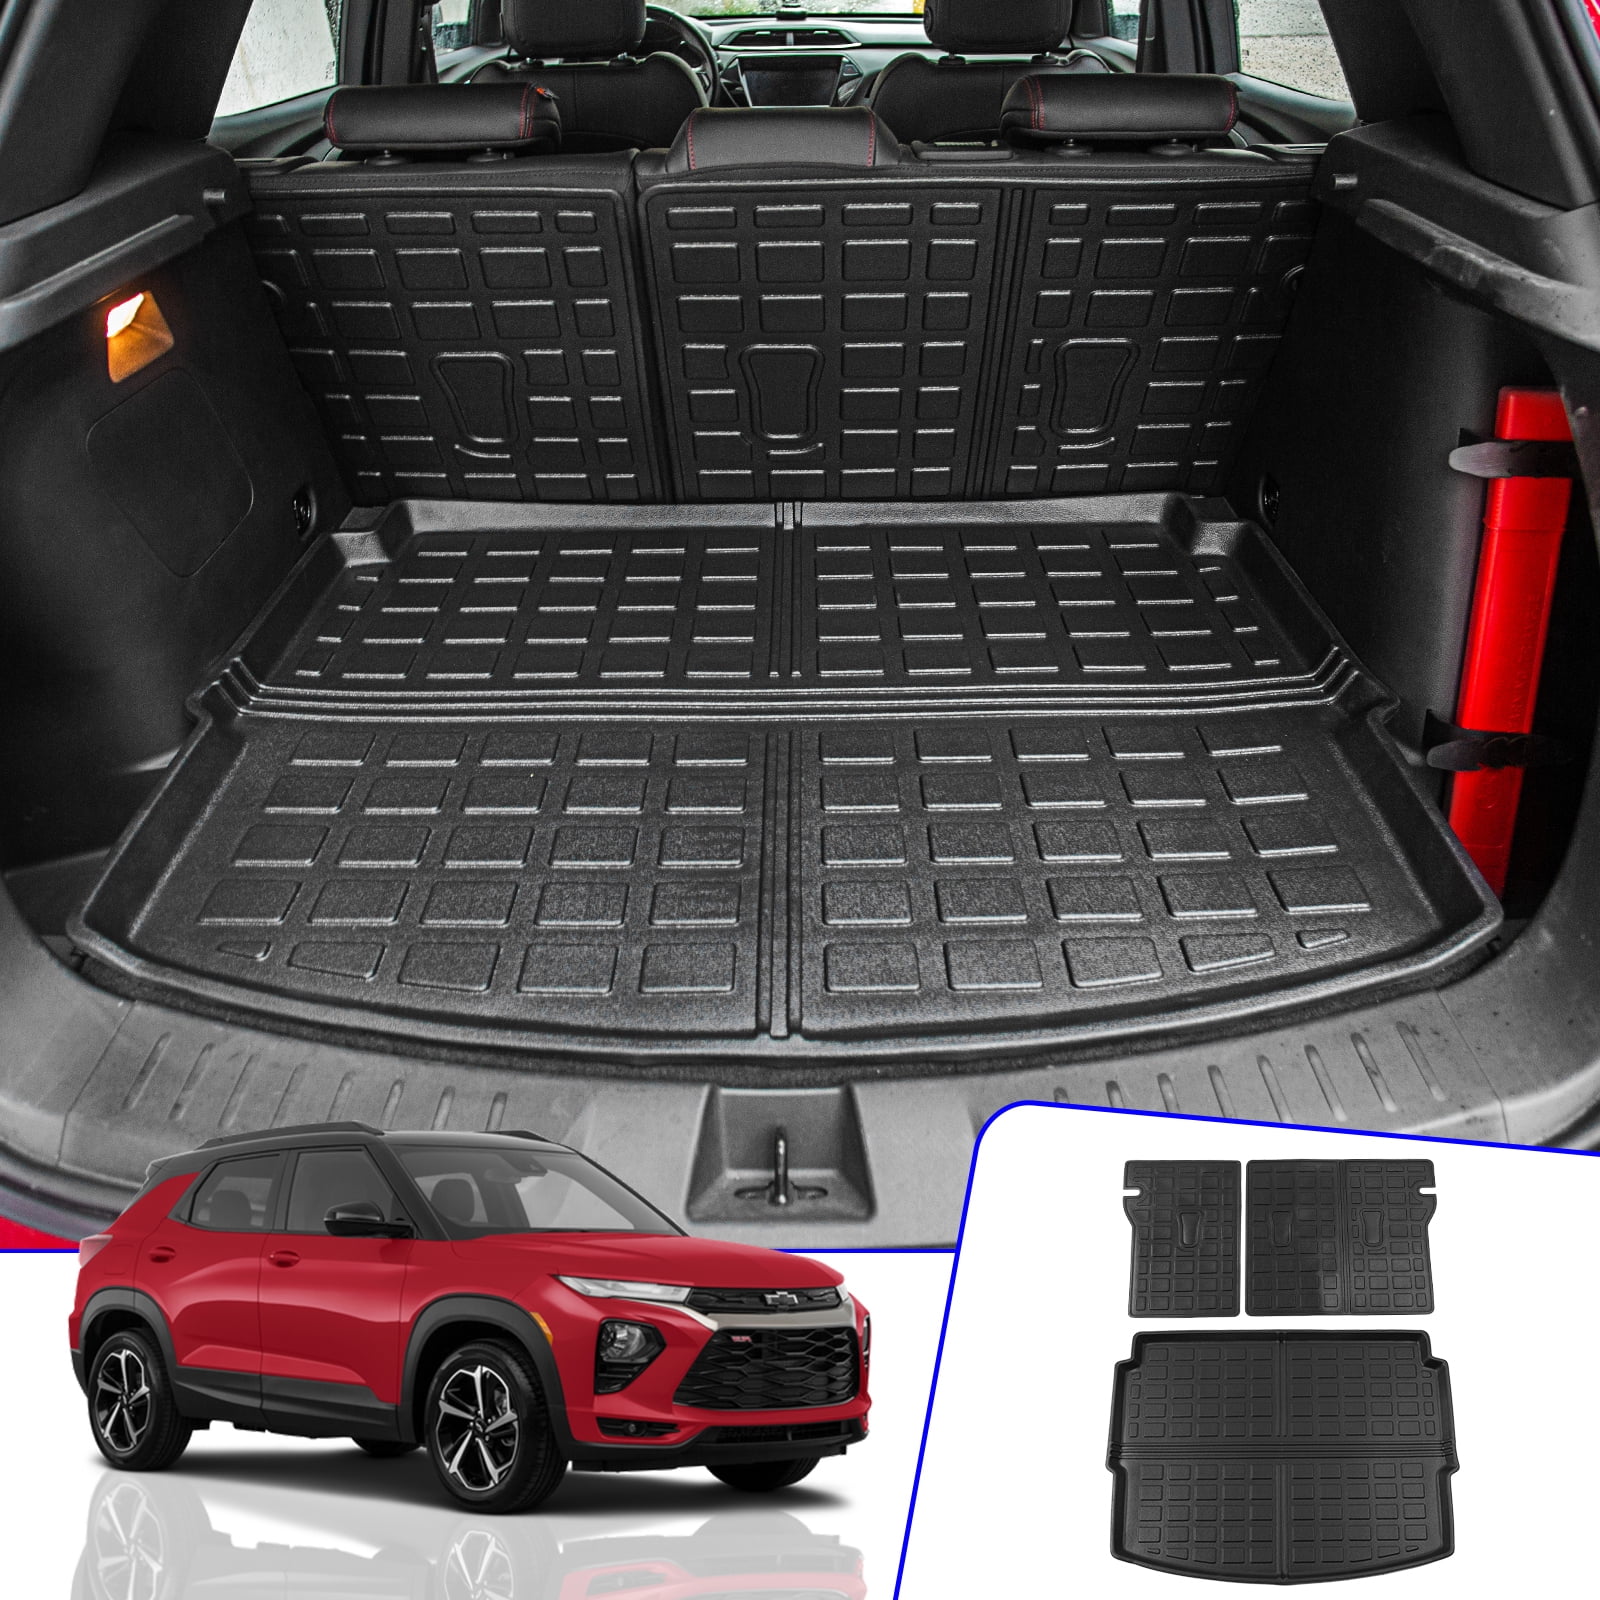 Accessories Cargo Mat+Backrest Tahoe 2022-2023 Cargo All Liner Mats) Tahoe 2022 Chevrolet Fit Seat Chevy Protector Weather Mat Yukon Back Mat GMC Cover (Trunk Trunk TPE